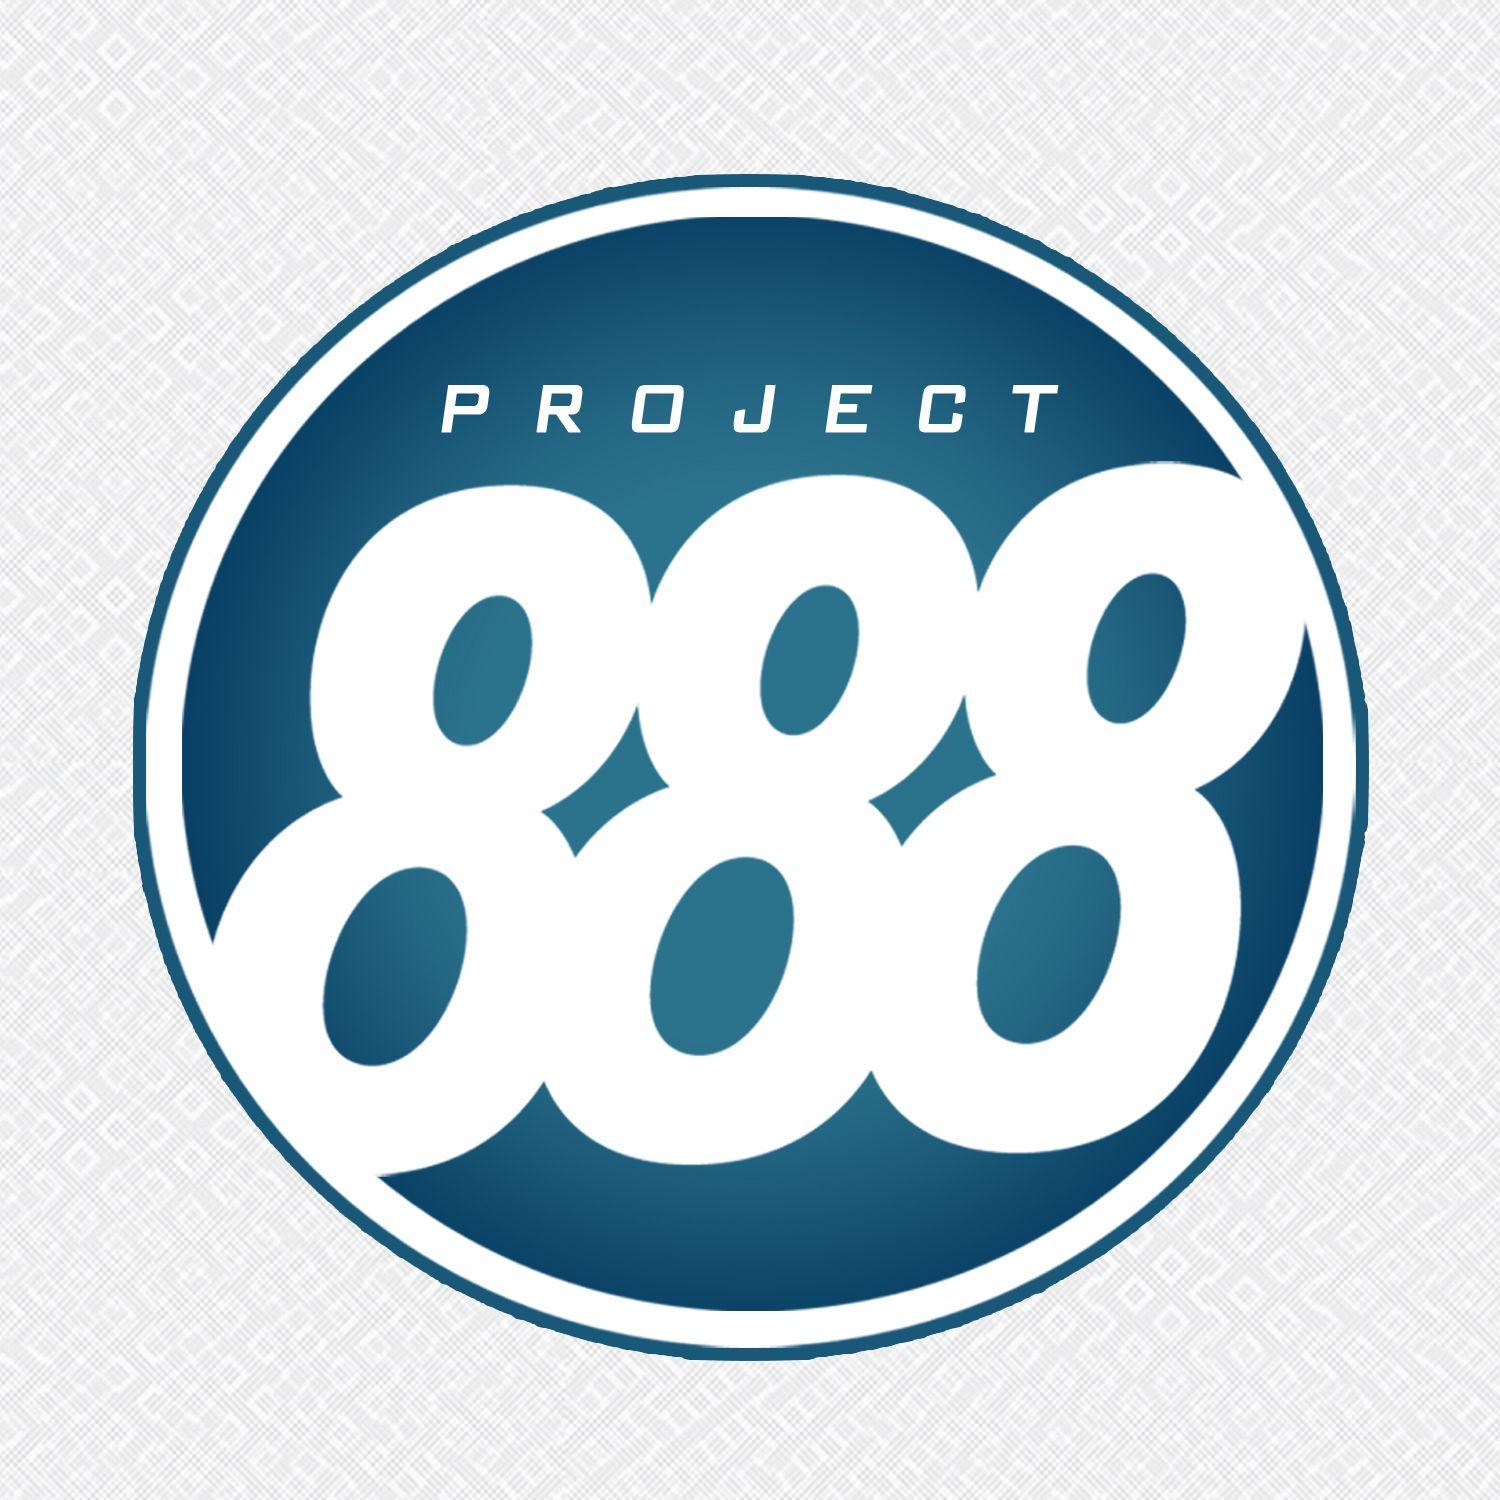 888 Logo - Project 888 in Sultan Kudarat - YesPinoy Foundation